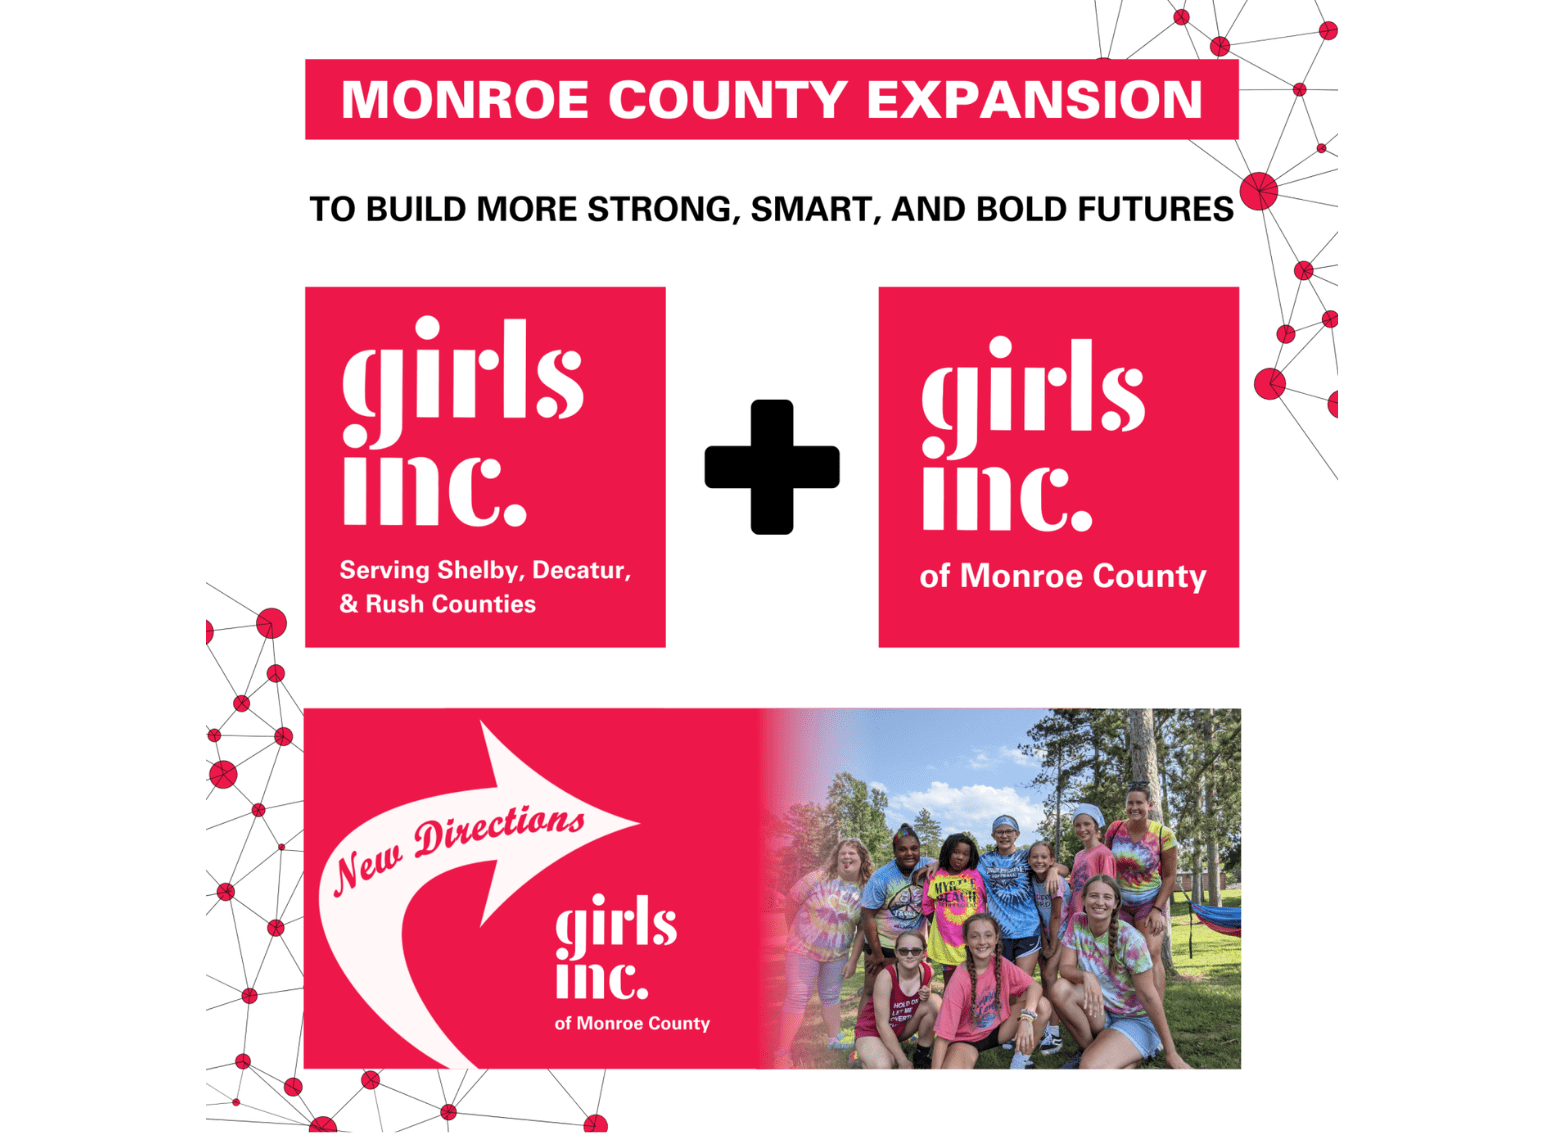 Girls Inc. serving Shelby, Decatur, and Rush Counties Expands into Monroe County